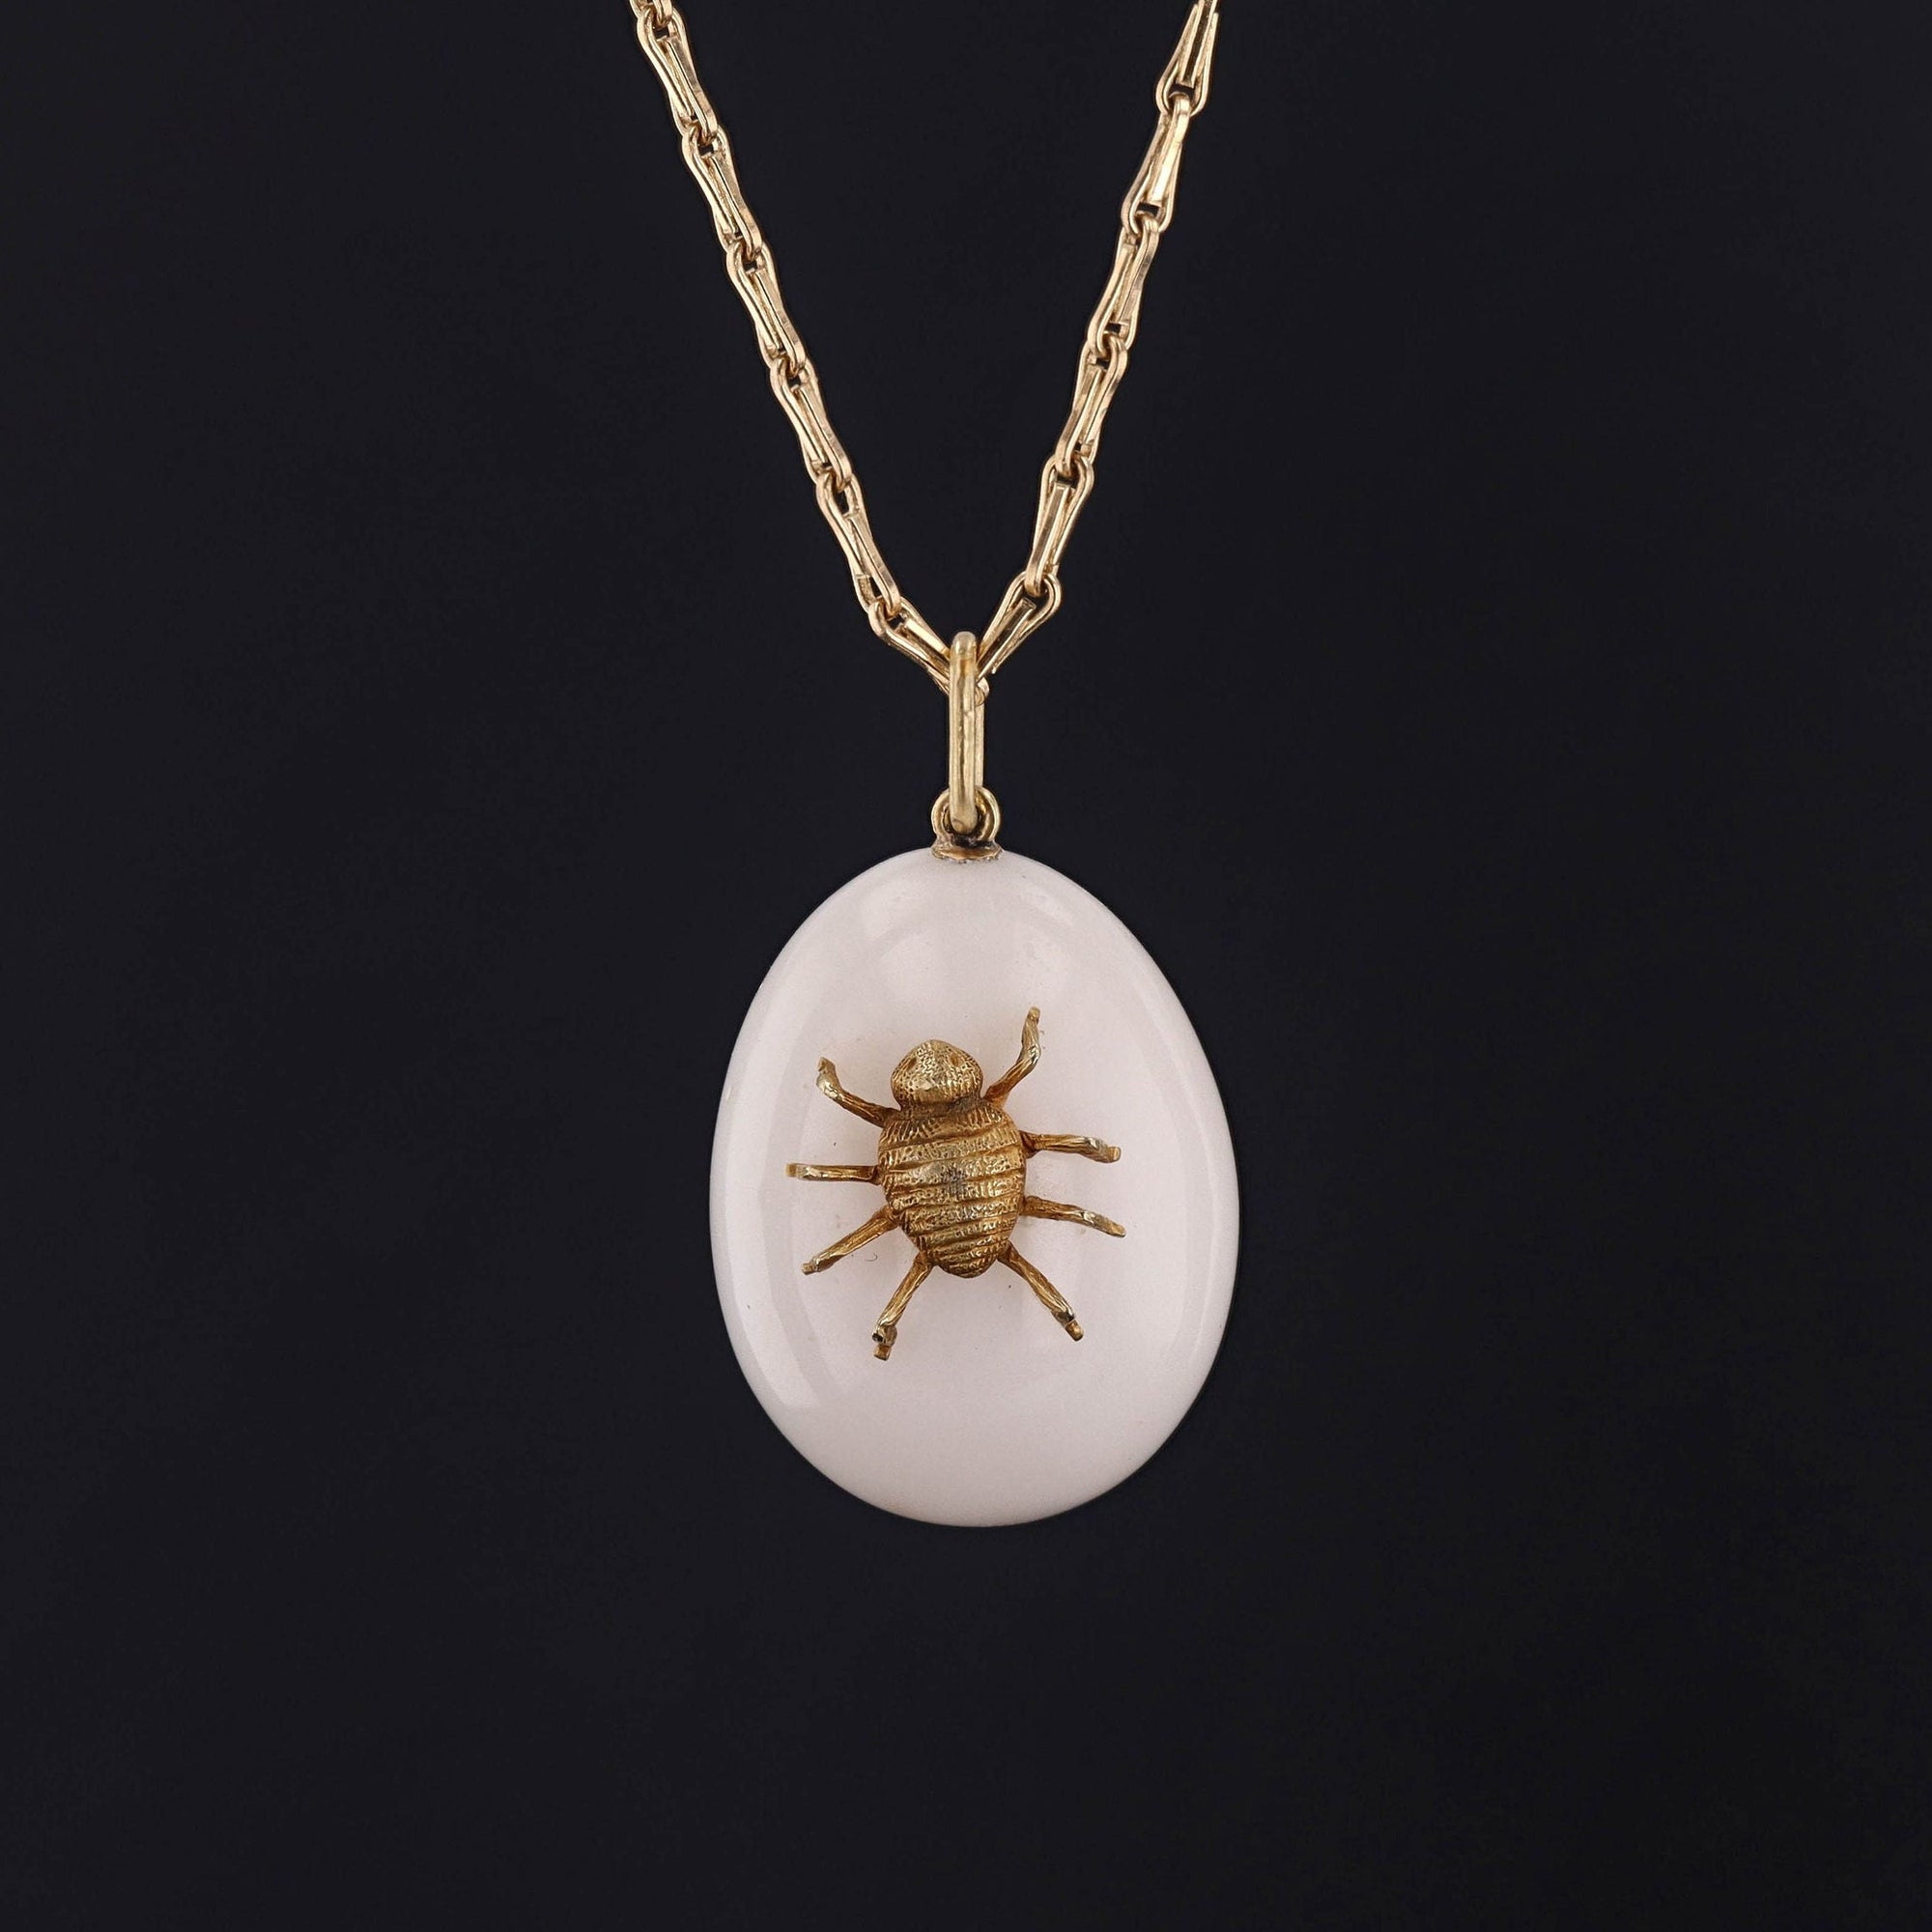 Antique Spider on Egg Pendant with Optional 18k Chain